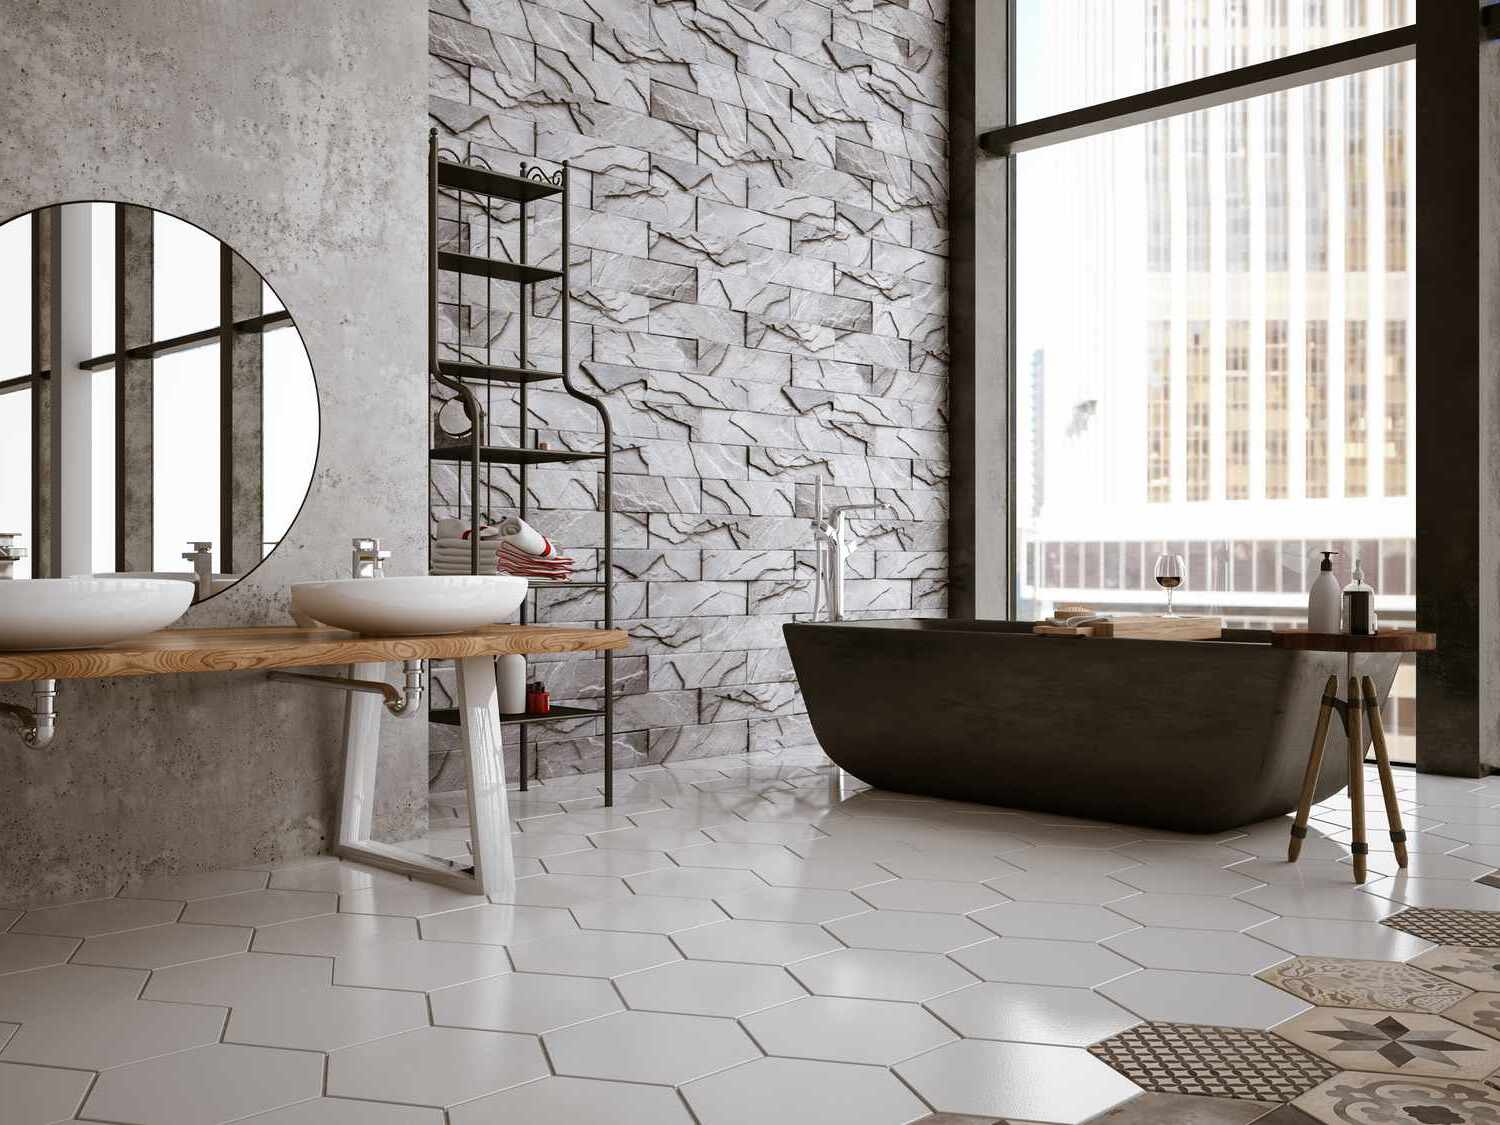 Step-by-step guide to tiling a bathroom wall